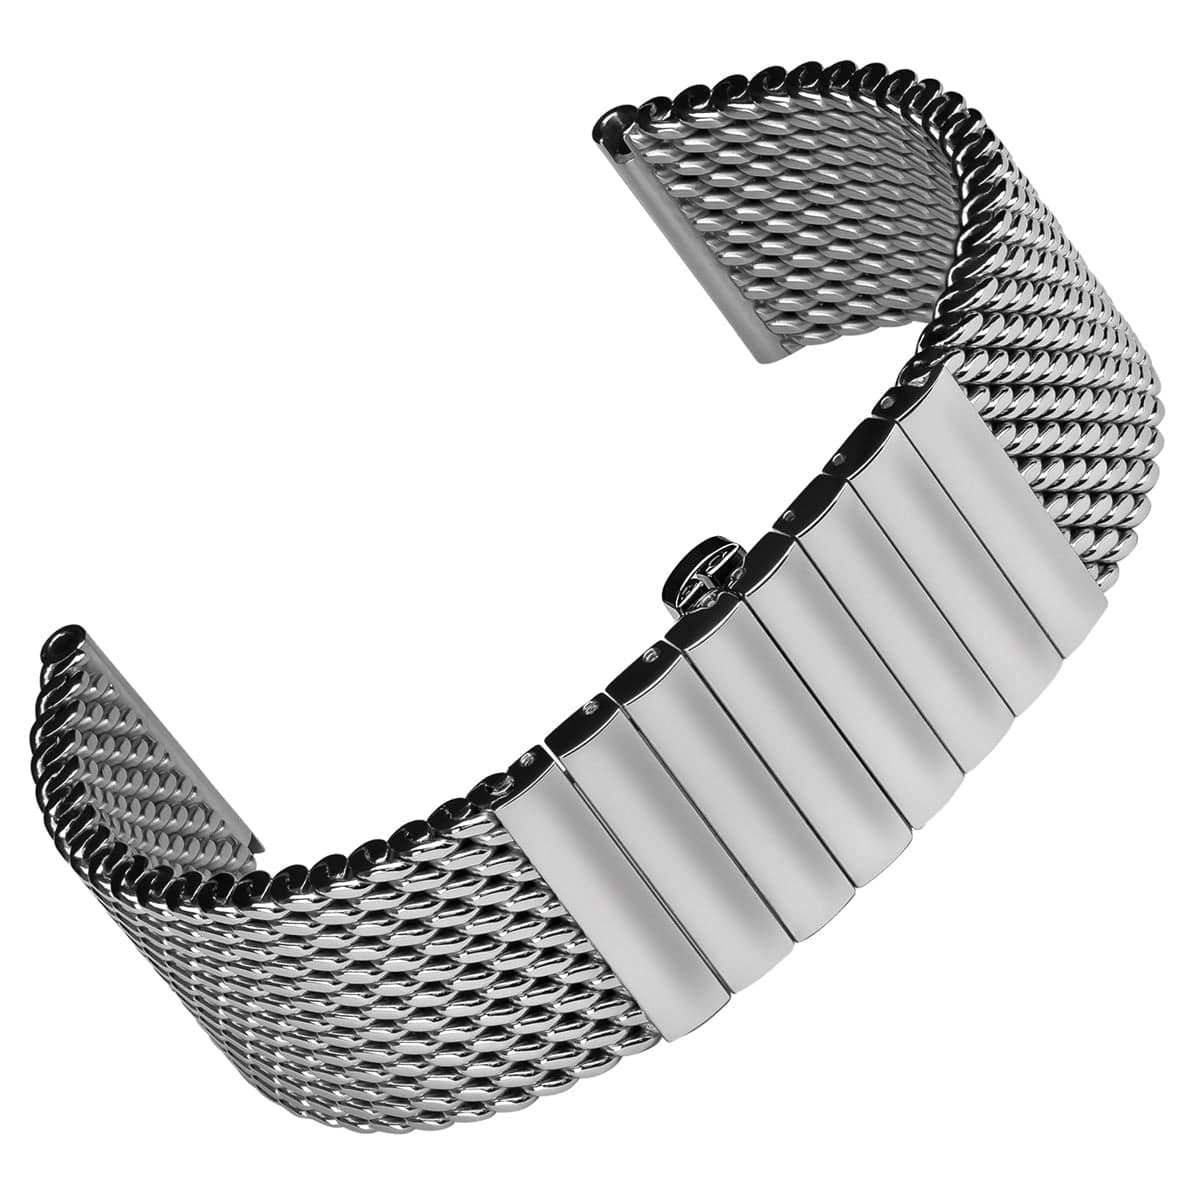 Mesh Band Double Fold Over Clasp